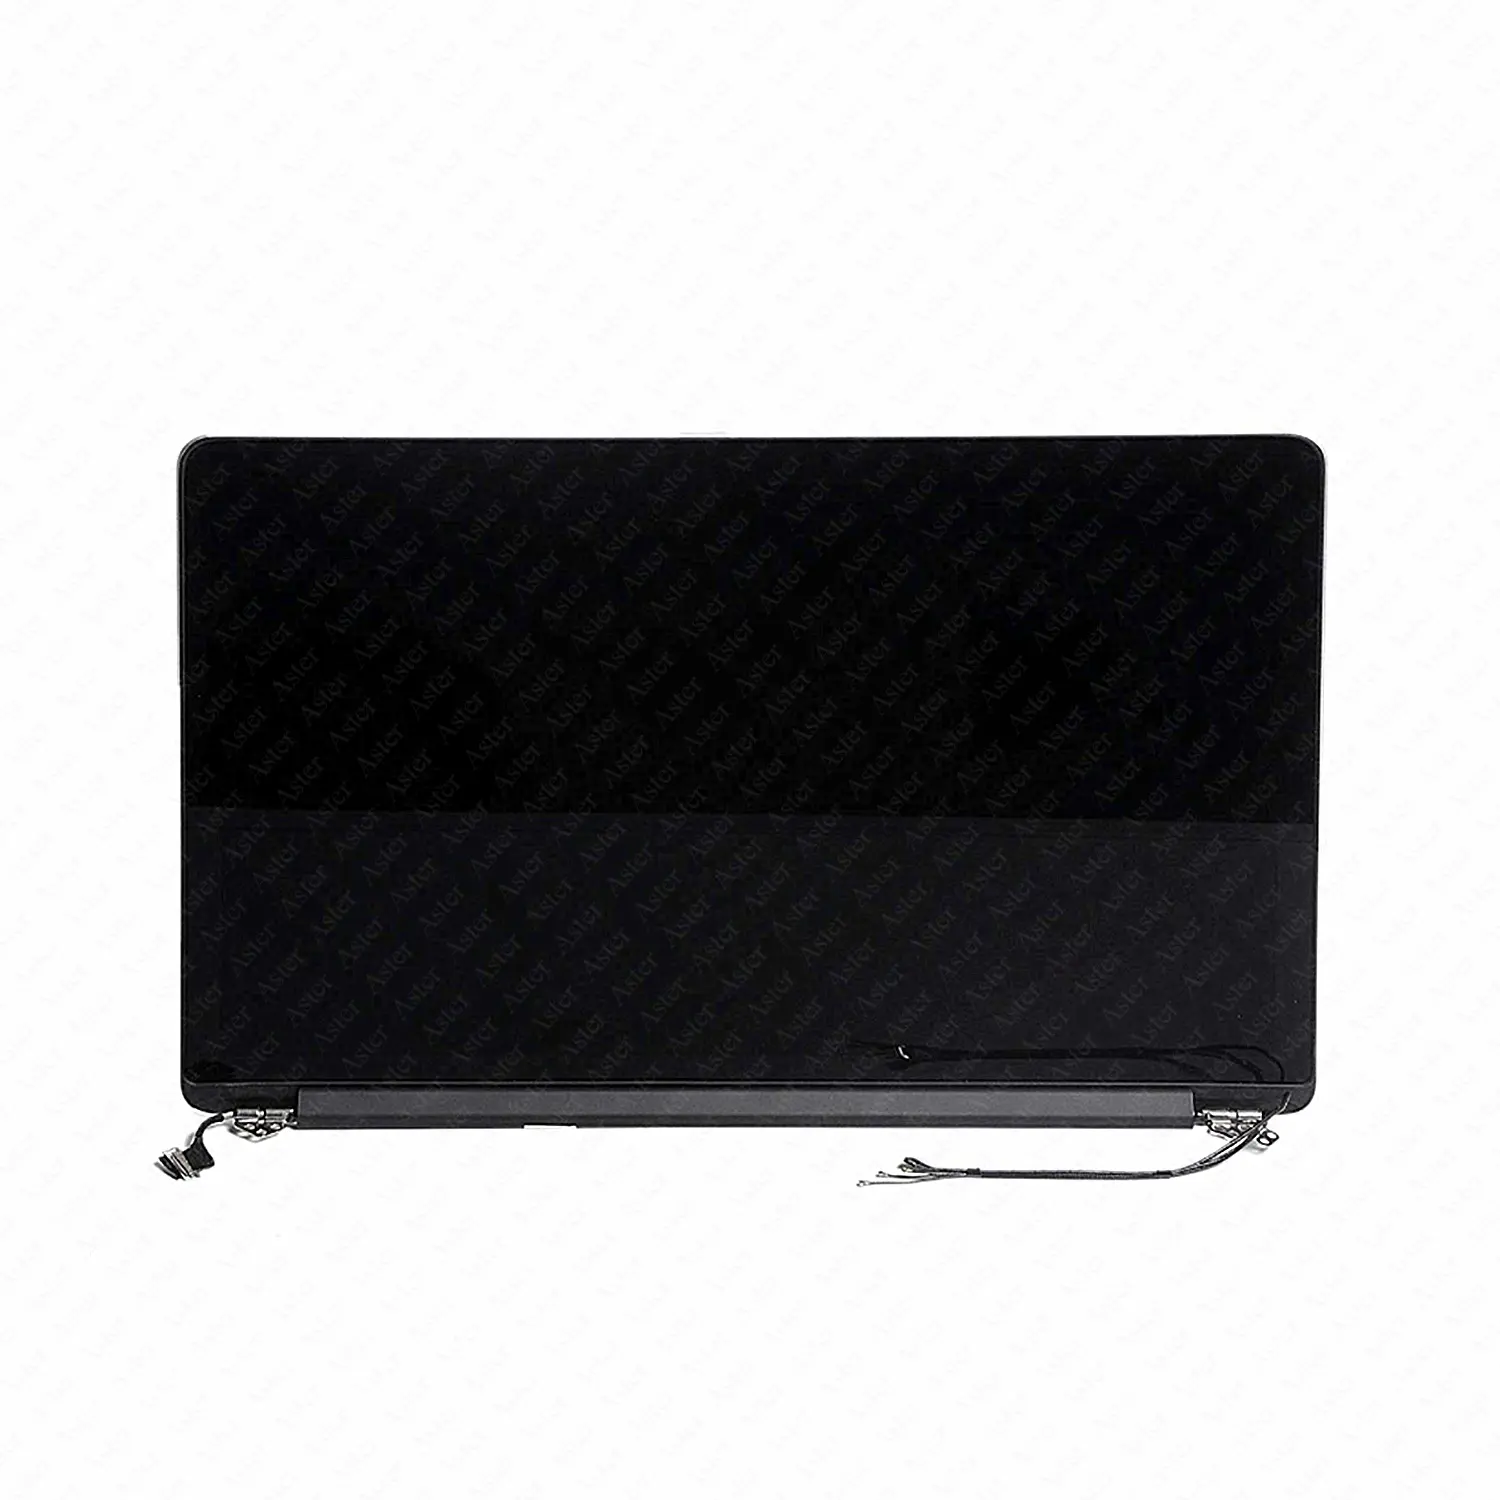 Genuine 2015 Year For MacBook Pro Retina 15" A1398 LCD Screen Assembly Full Display With Aluminum Cover Complete